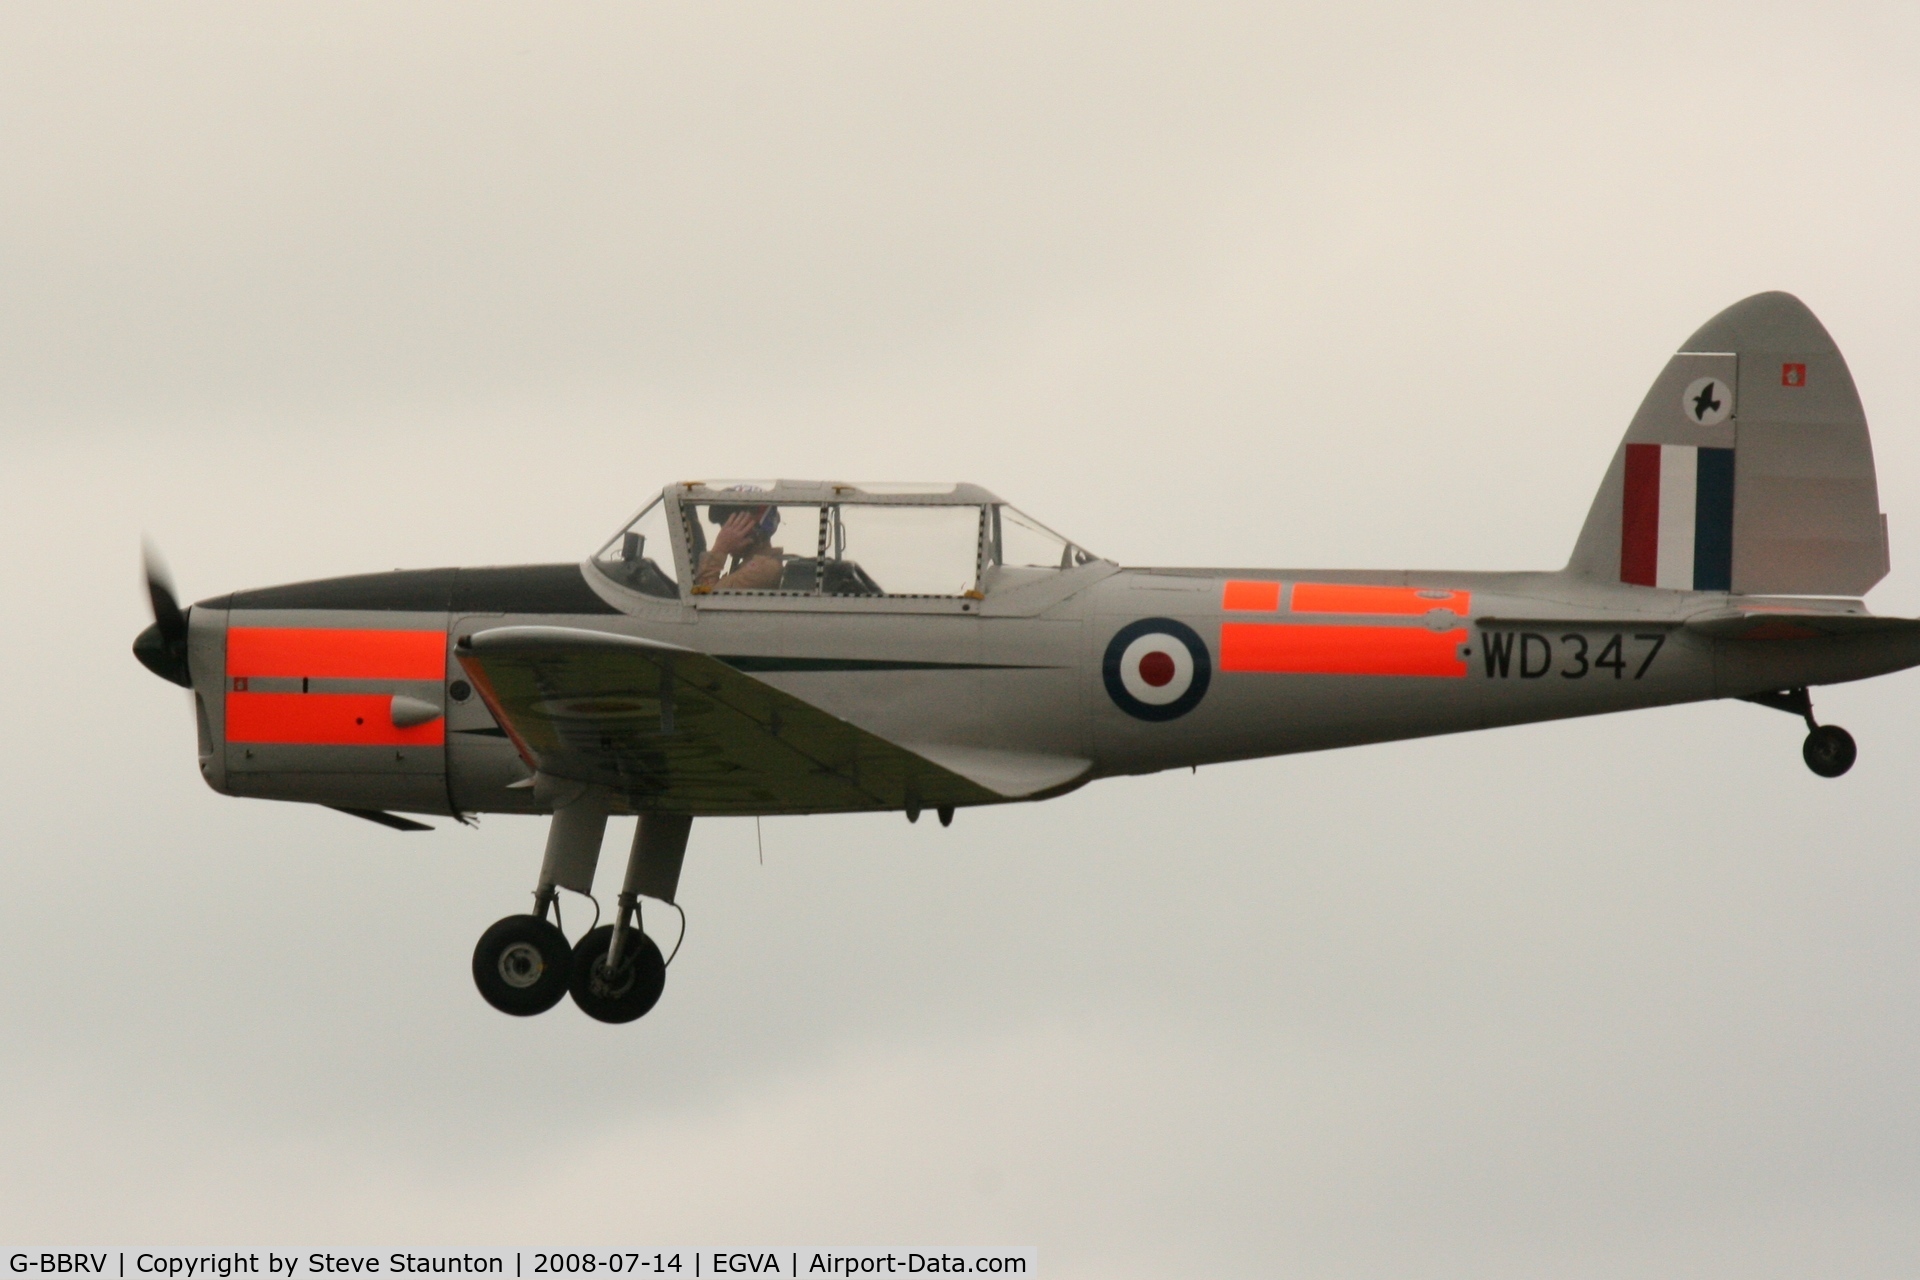 G-BBRV, 1951 De Havilland DHC-1 Chipmunk T.10 C/N C1/0284, Taken at the Royal International Air Tattoo 2008 during arrivals and departures (show days cancelled due to bad weather)